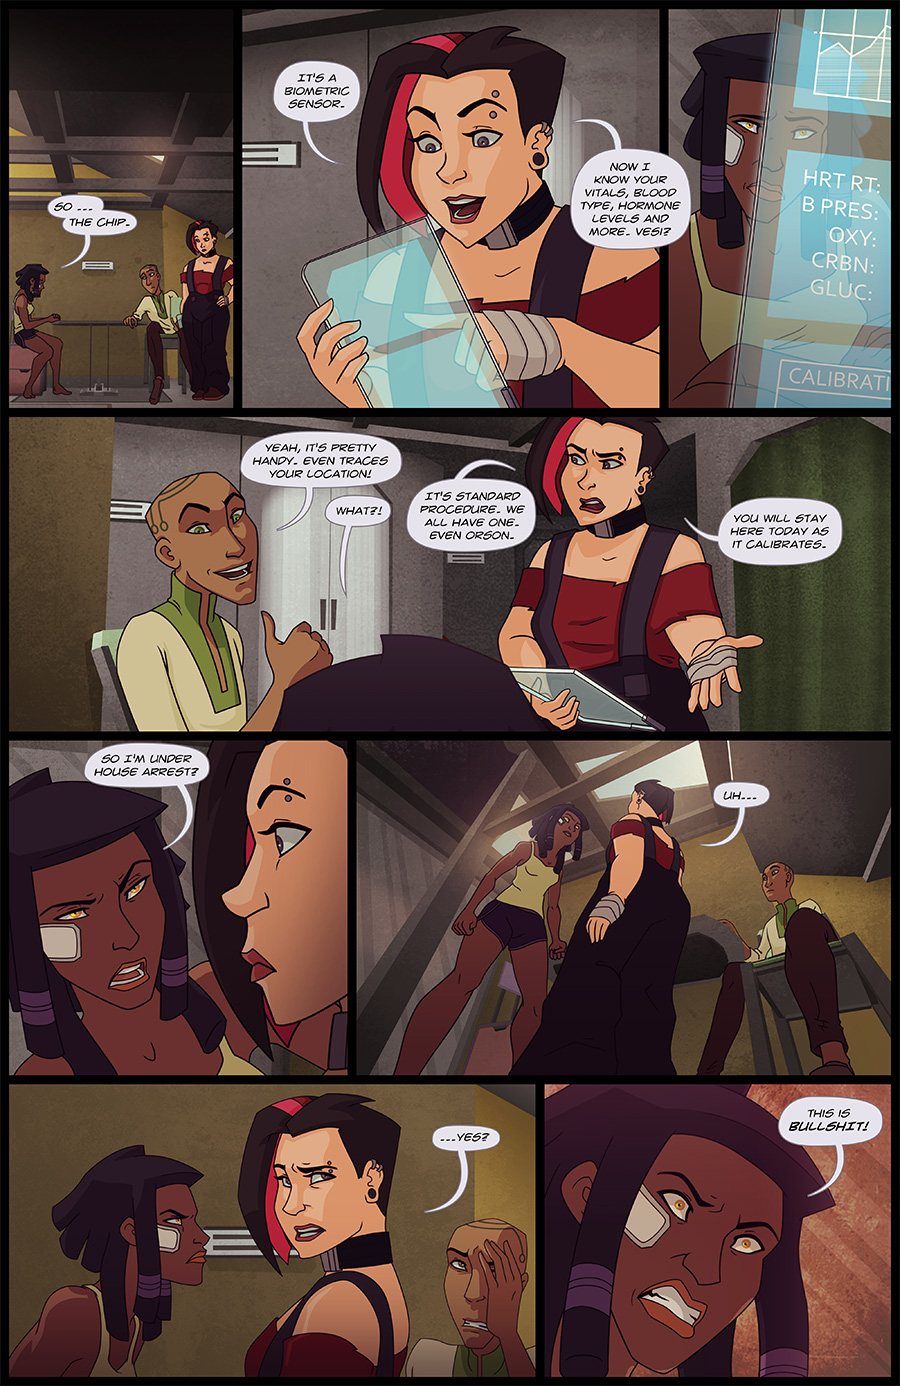 Episode 3 Act 1 Page 15: Markesha is introduced to the biometric tech, but when Audrey gets lost in translation Markesha’s temper flares up all over again.